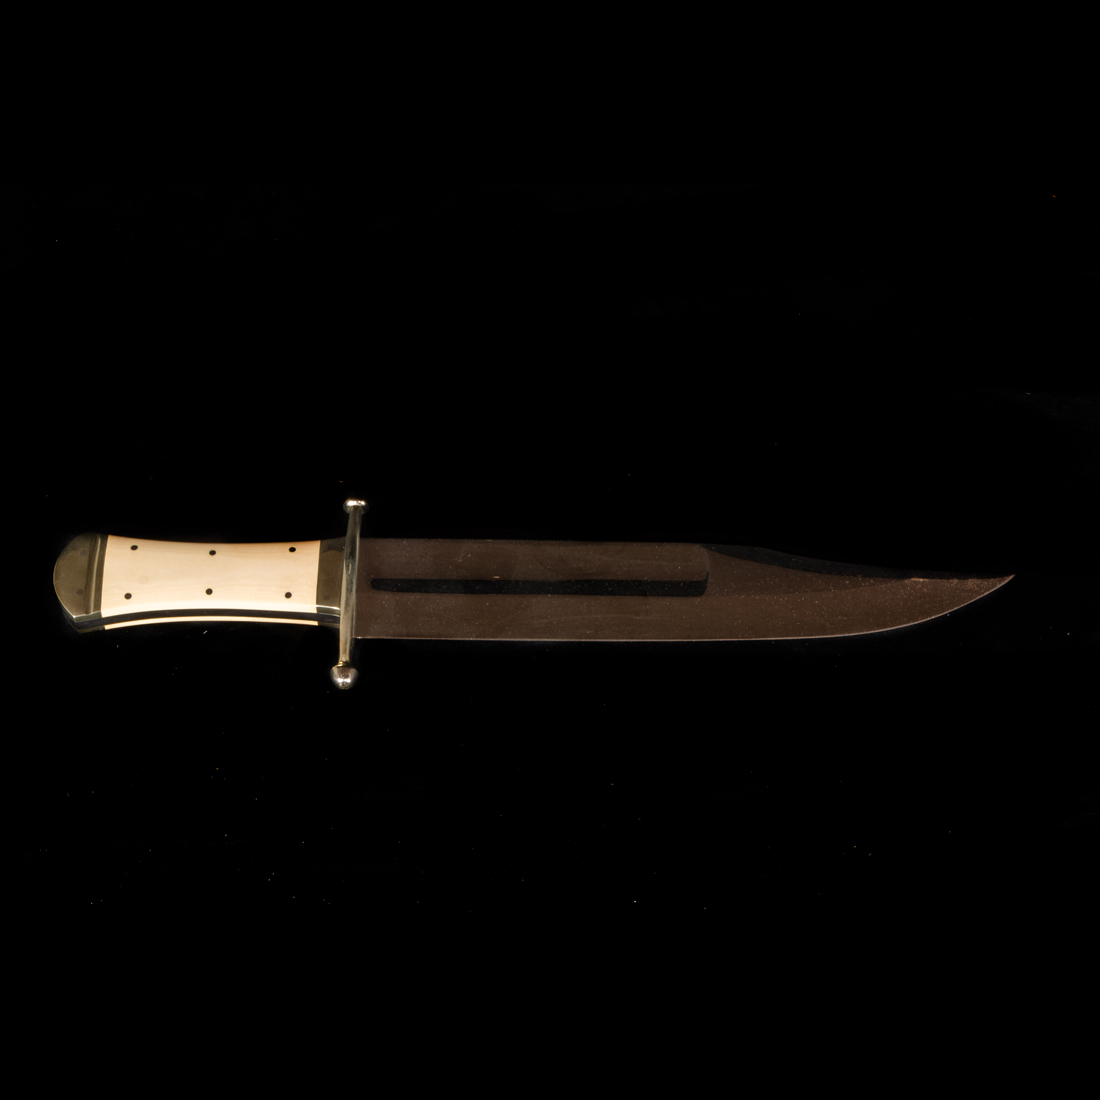 MODERN VOORHIS BOWIE KNIFE 8211 2d2f7f